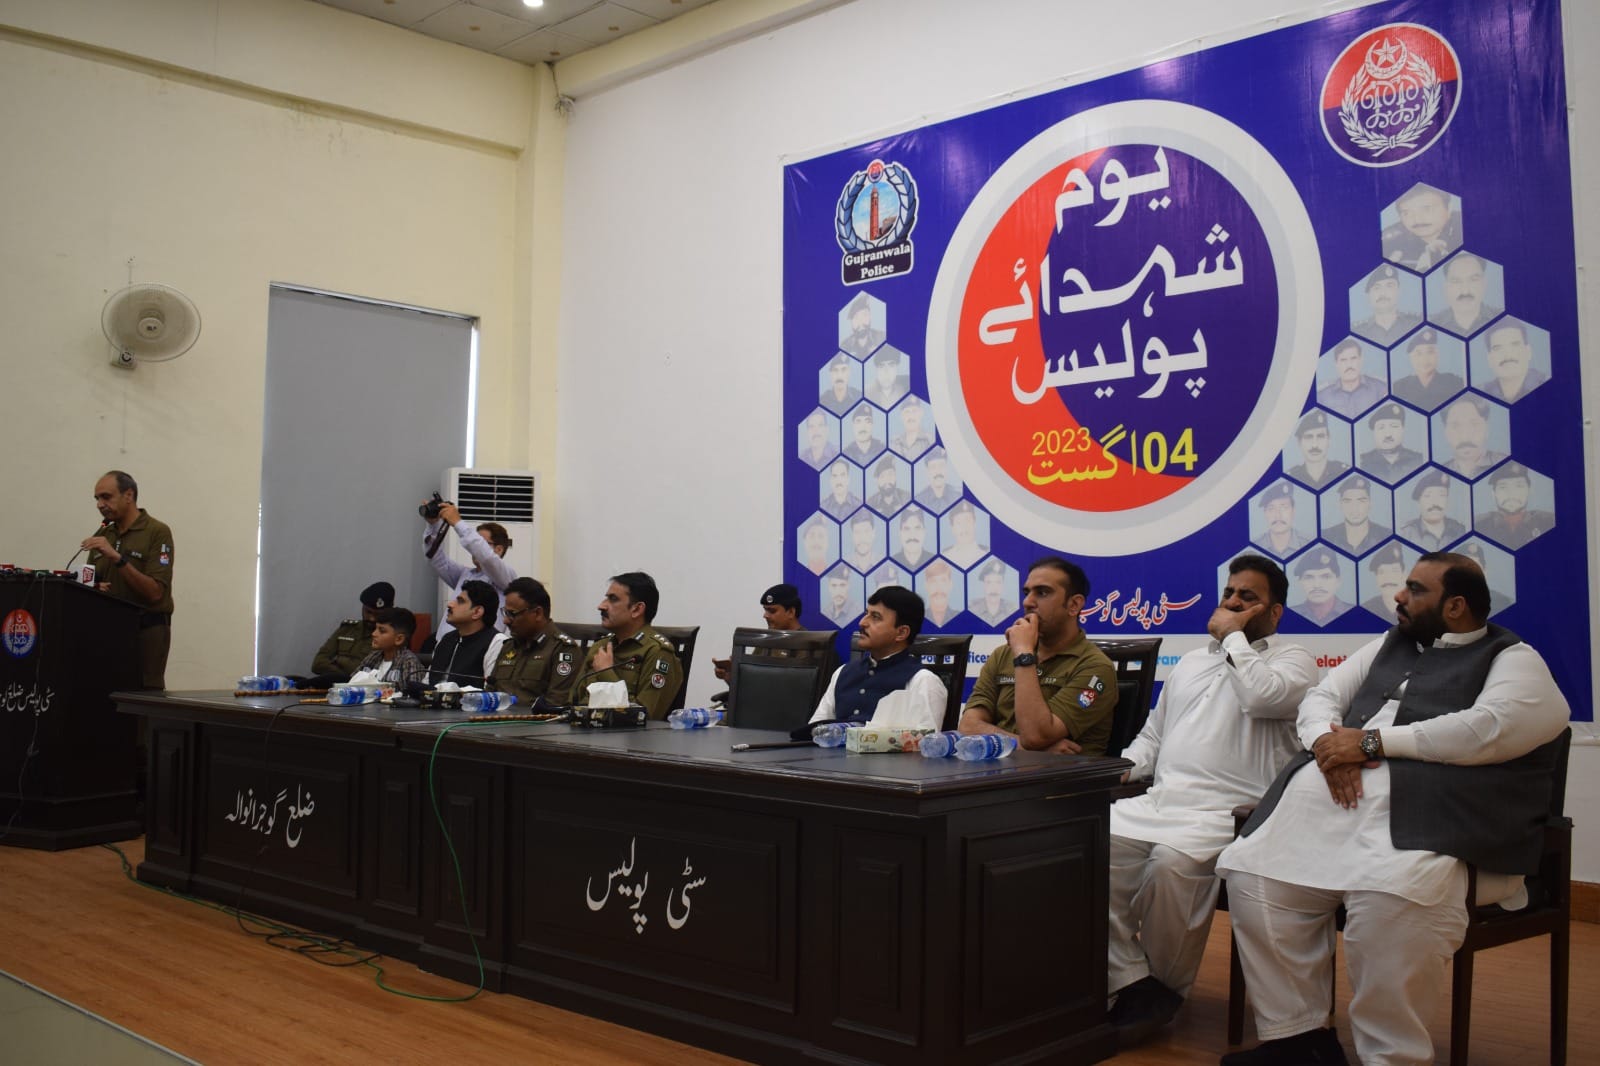 Police Martyrs Day was observed at Ashraf Marth Shaheed District Police Lines Grw.